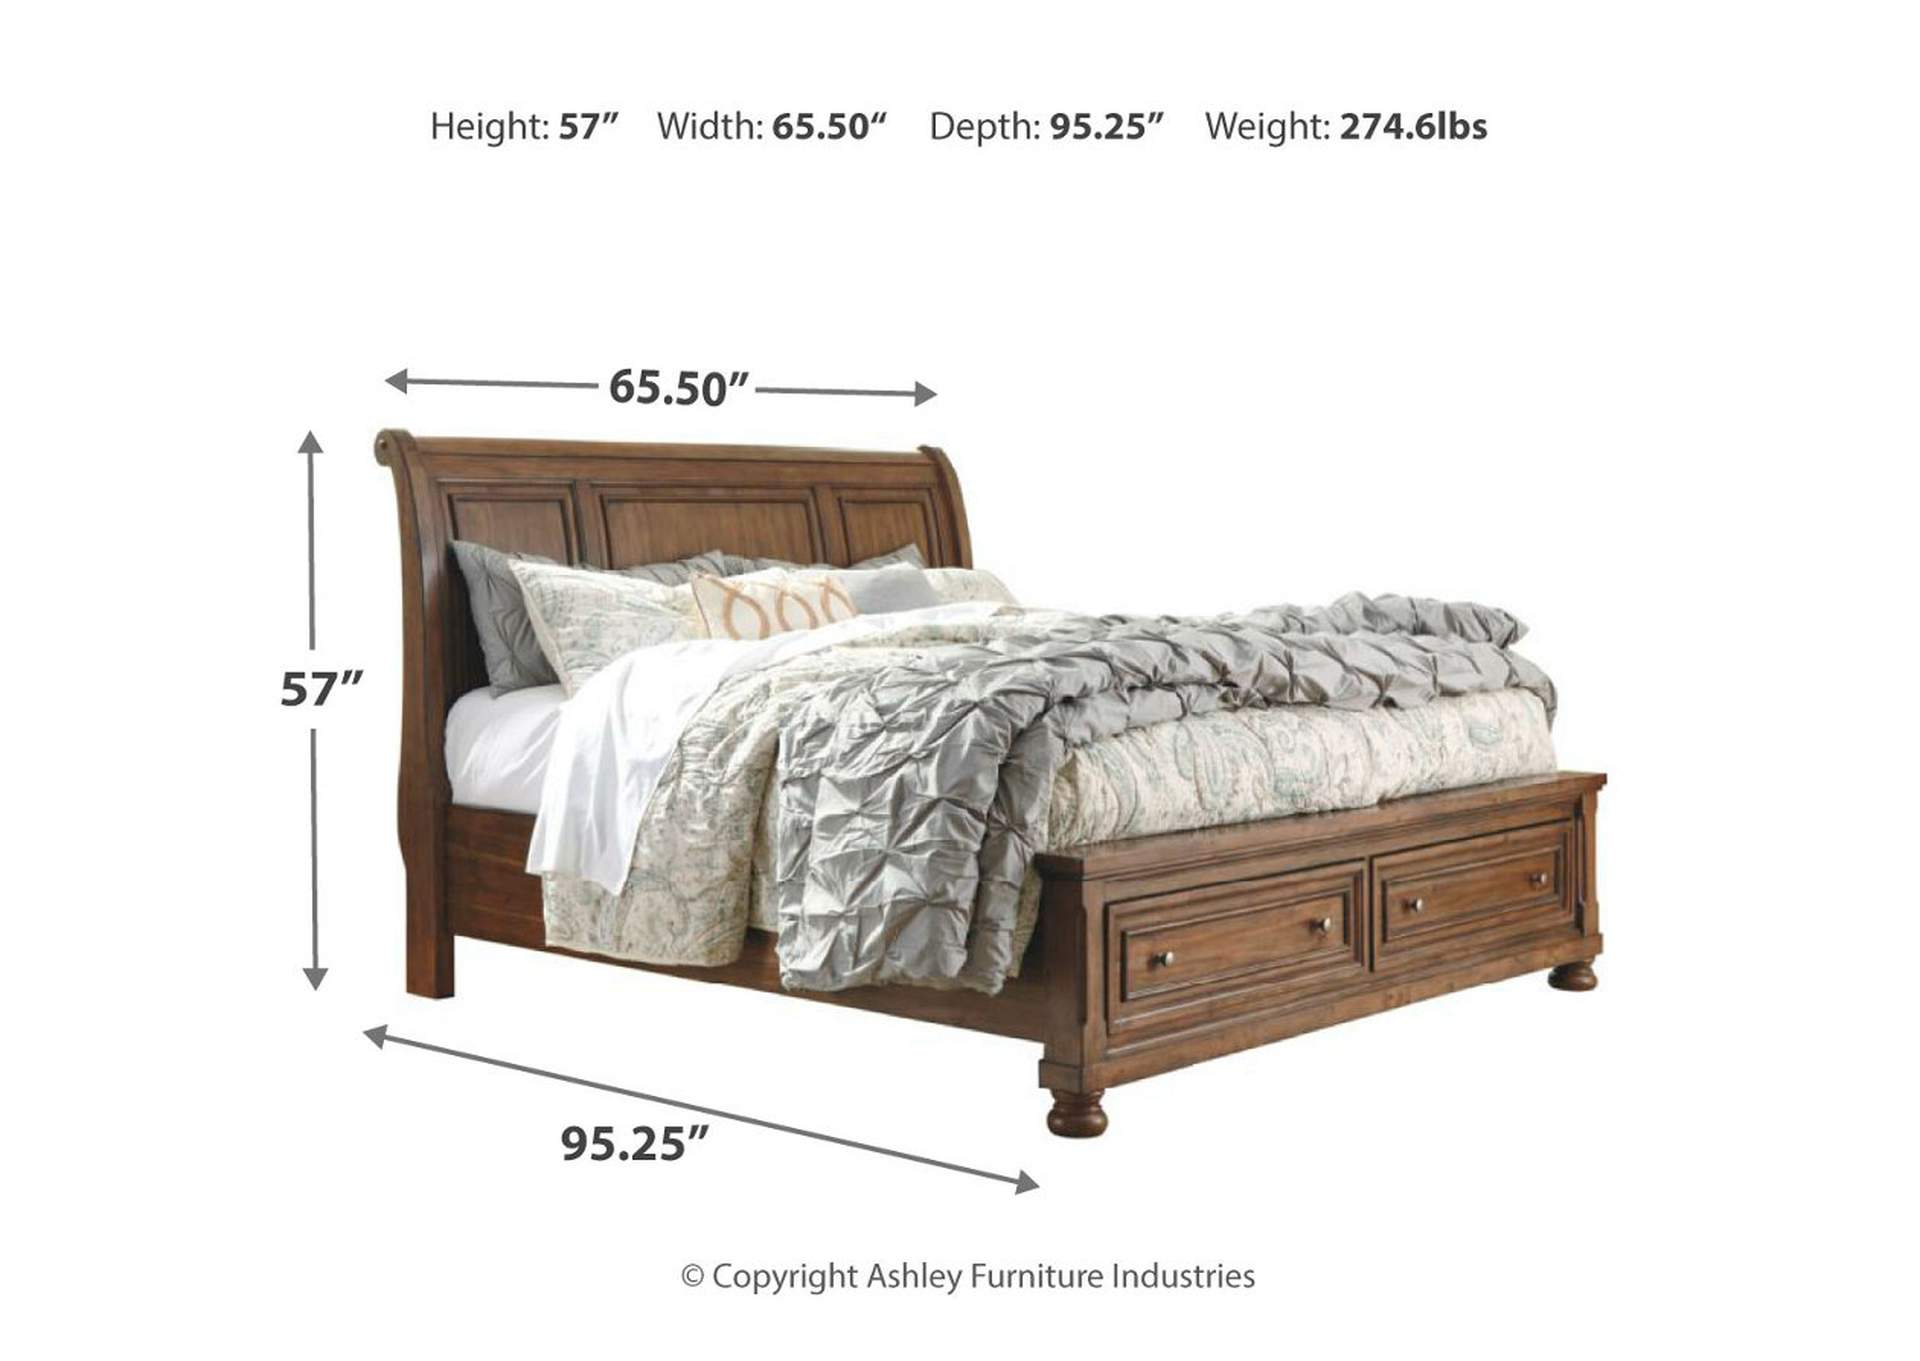 Flynnter Queen Sleigh Bed with 2 Storage Drawers with Mirrored Dresser, Chest and Nightstand,Signature Design By Ashley